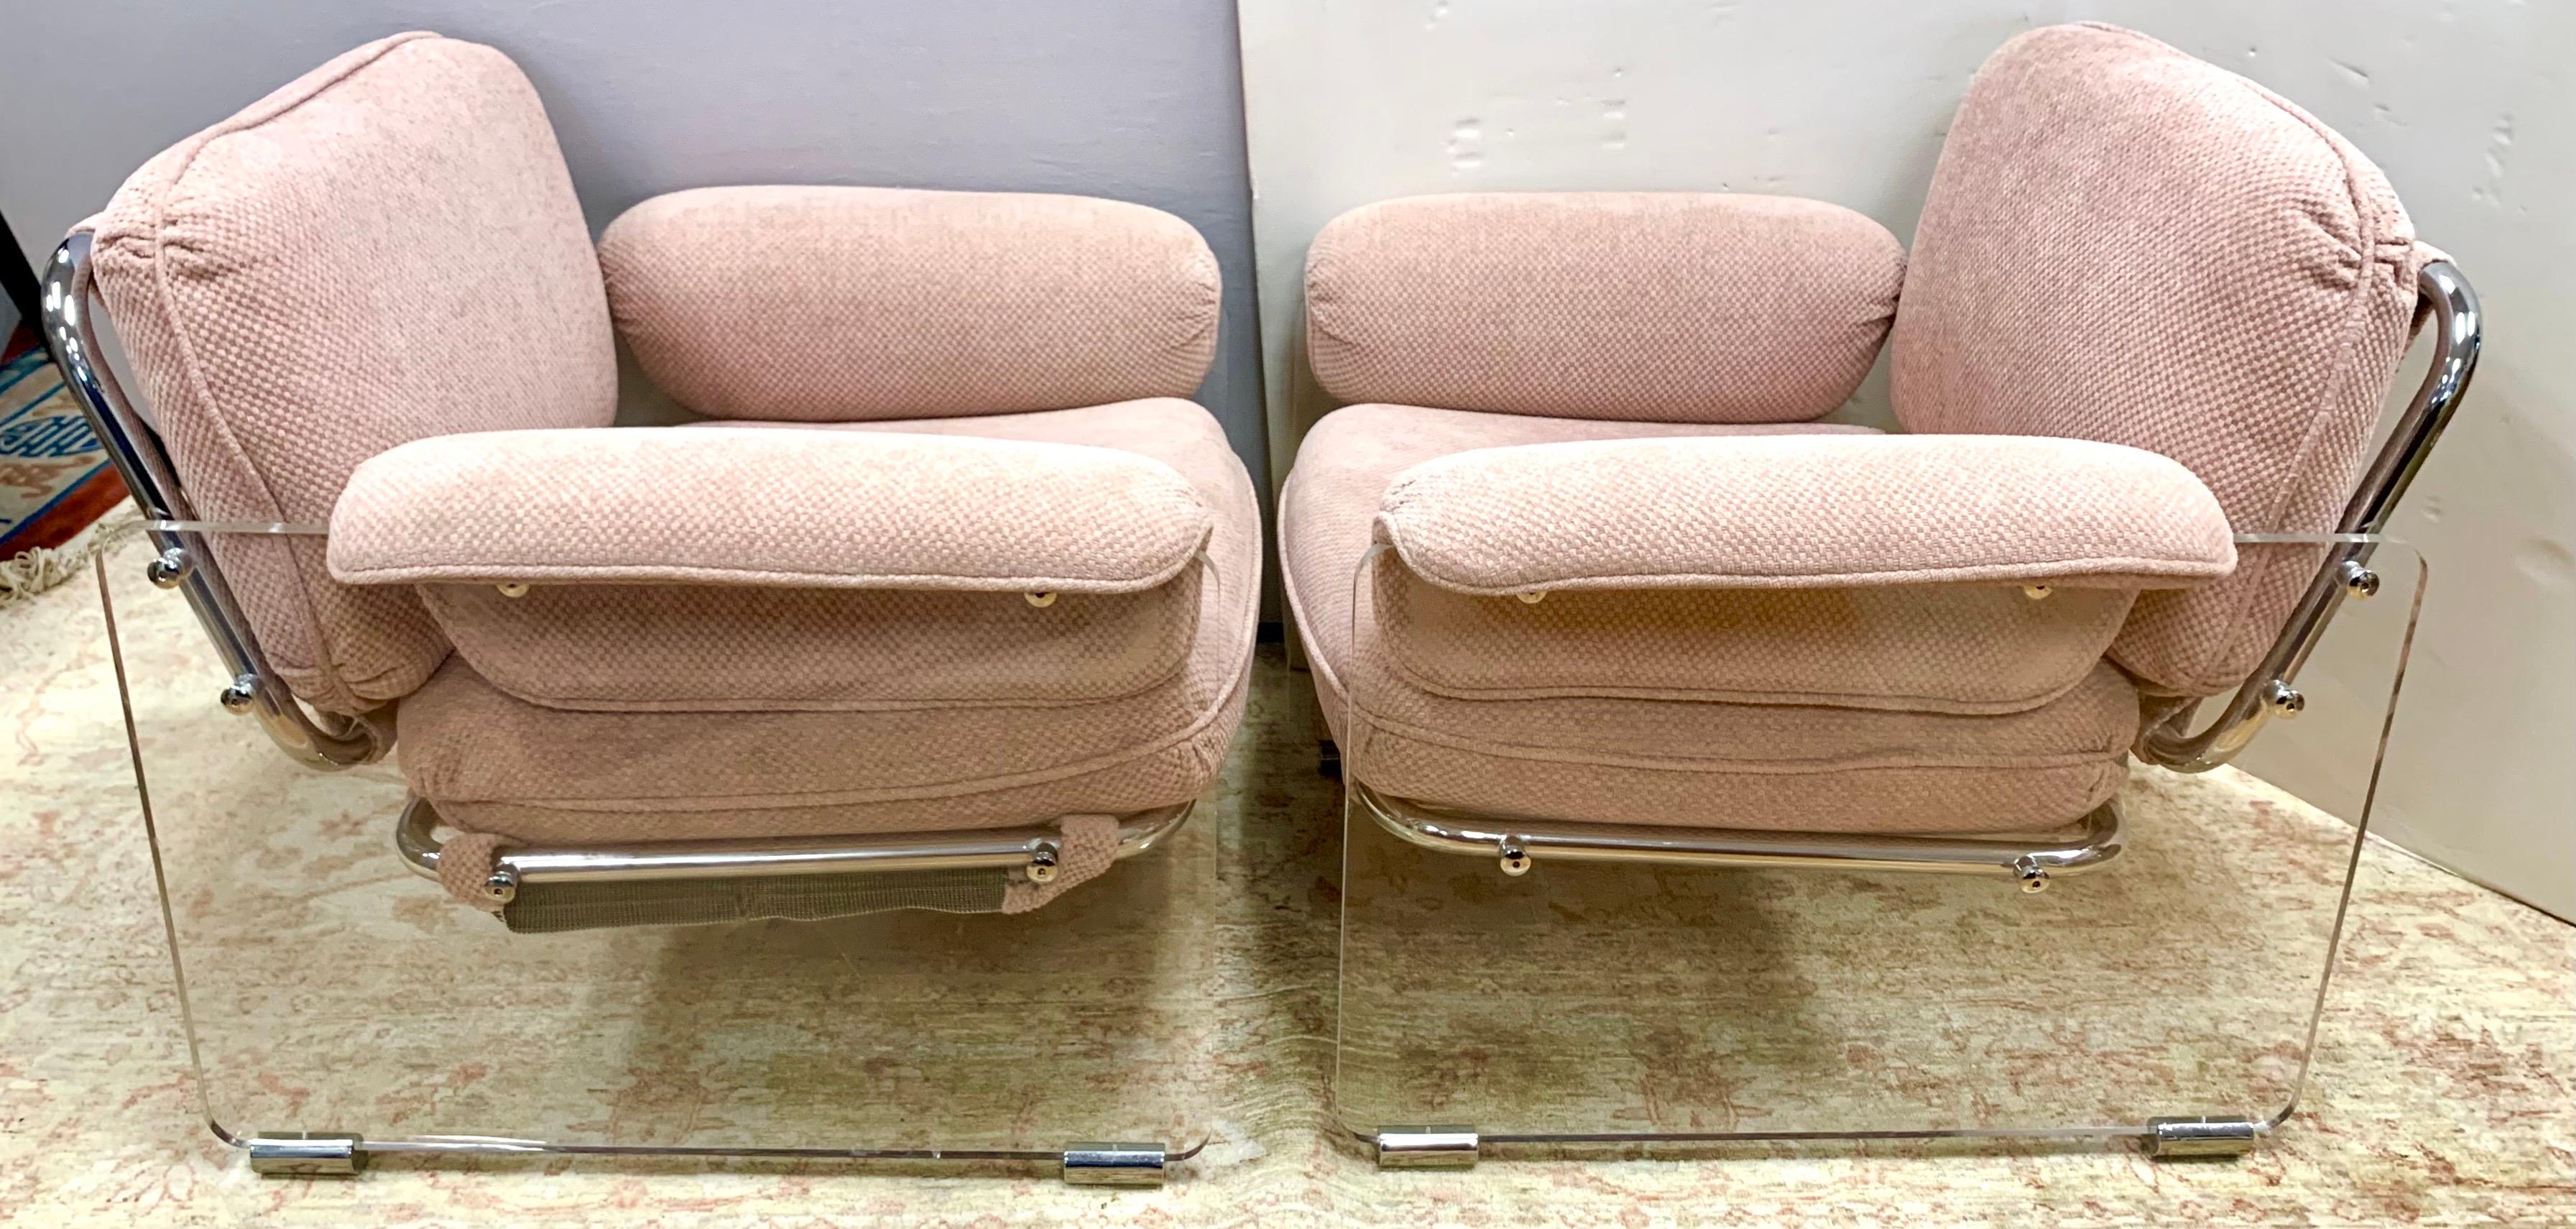 A pair of vintage 1970s Argenta lounge chairs by Pace Collection. Classic Pace design with Lucite and chrome frames upholstered in a pink chenille fabric.